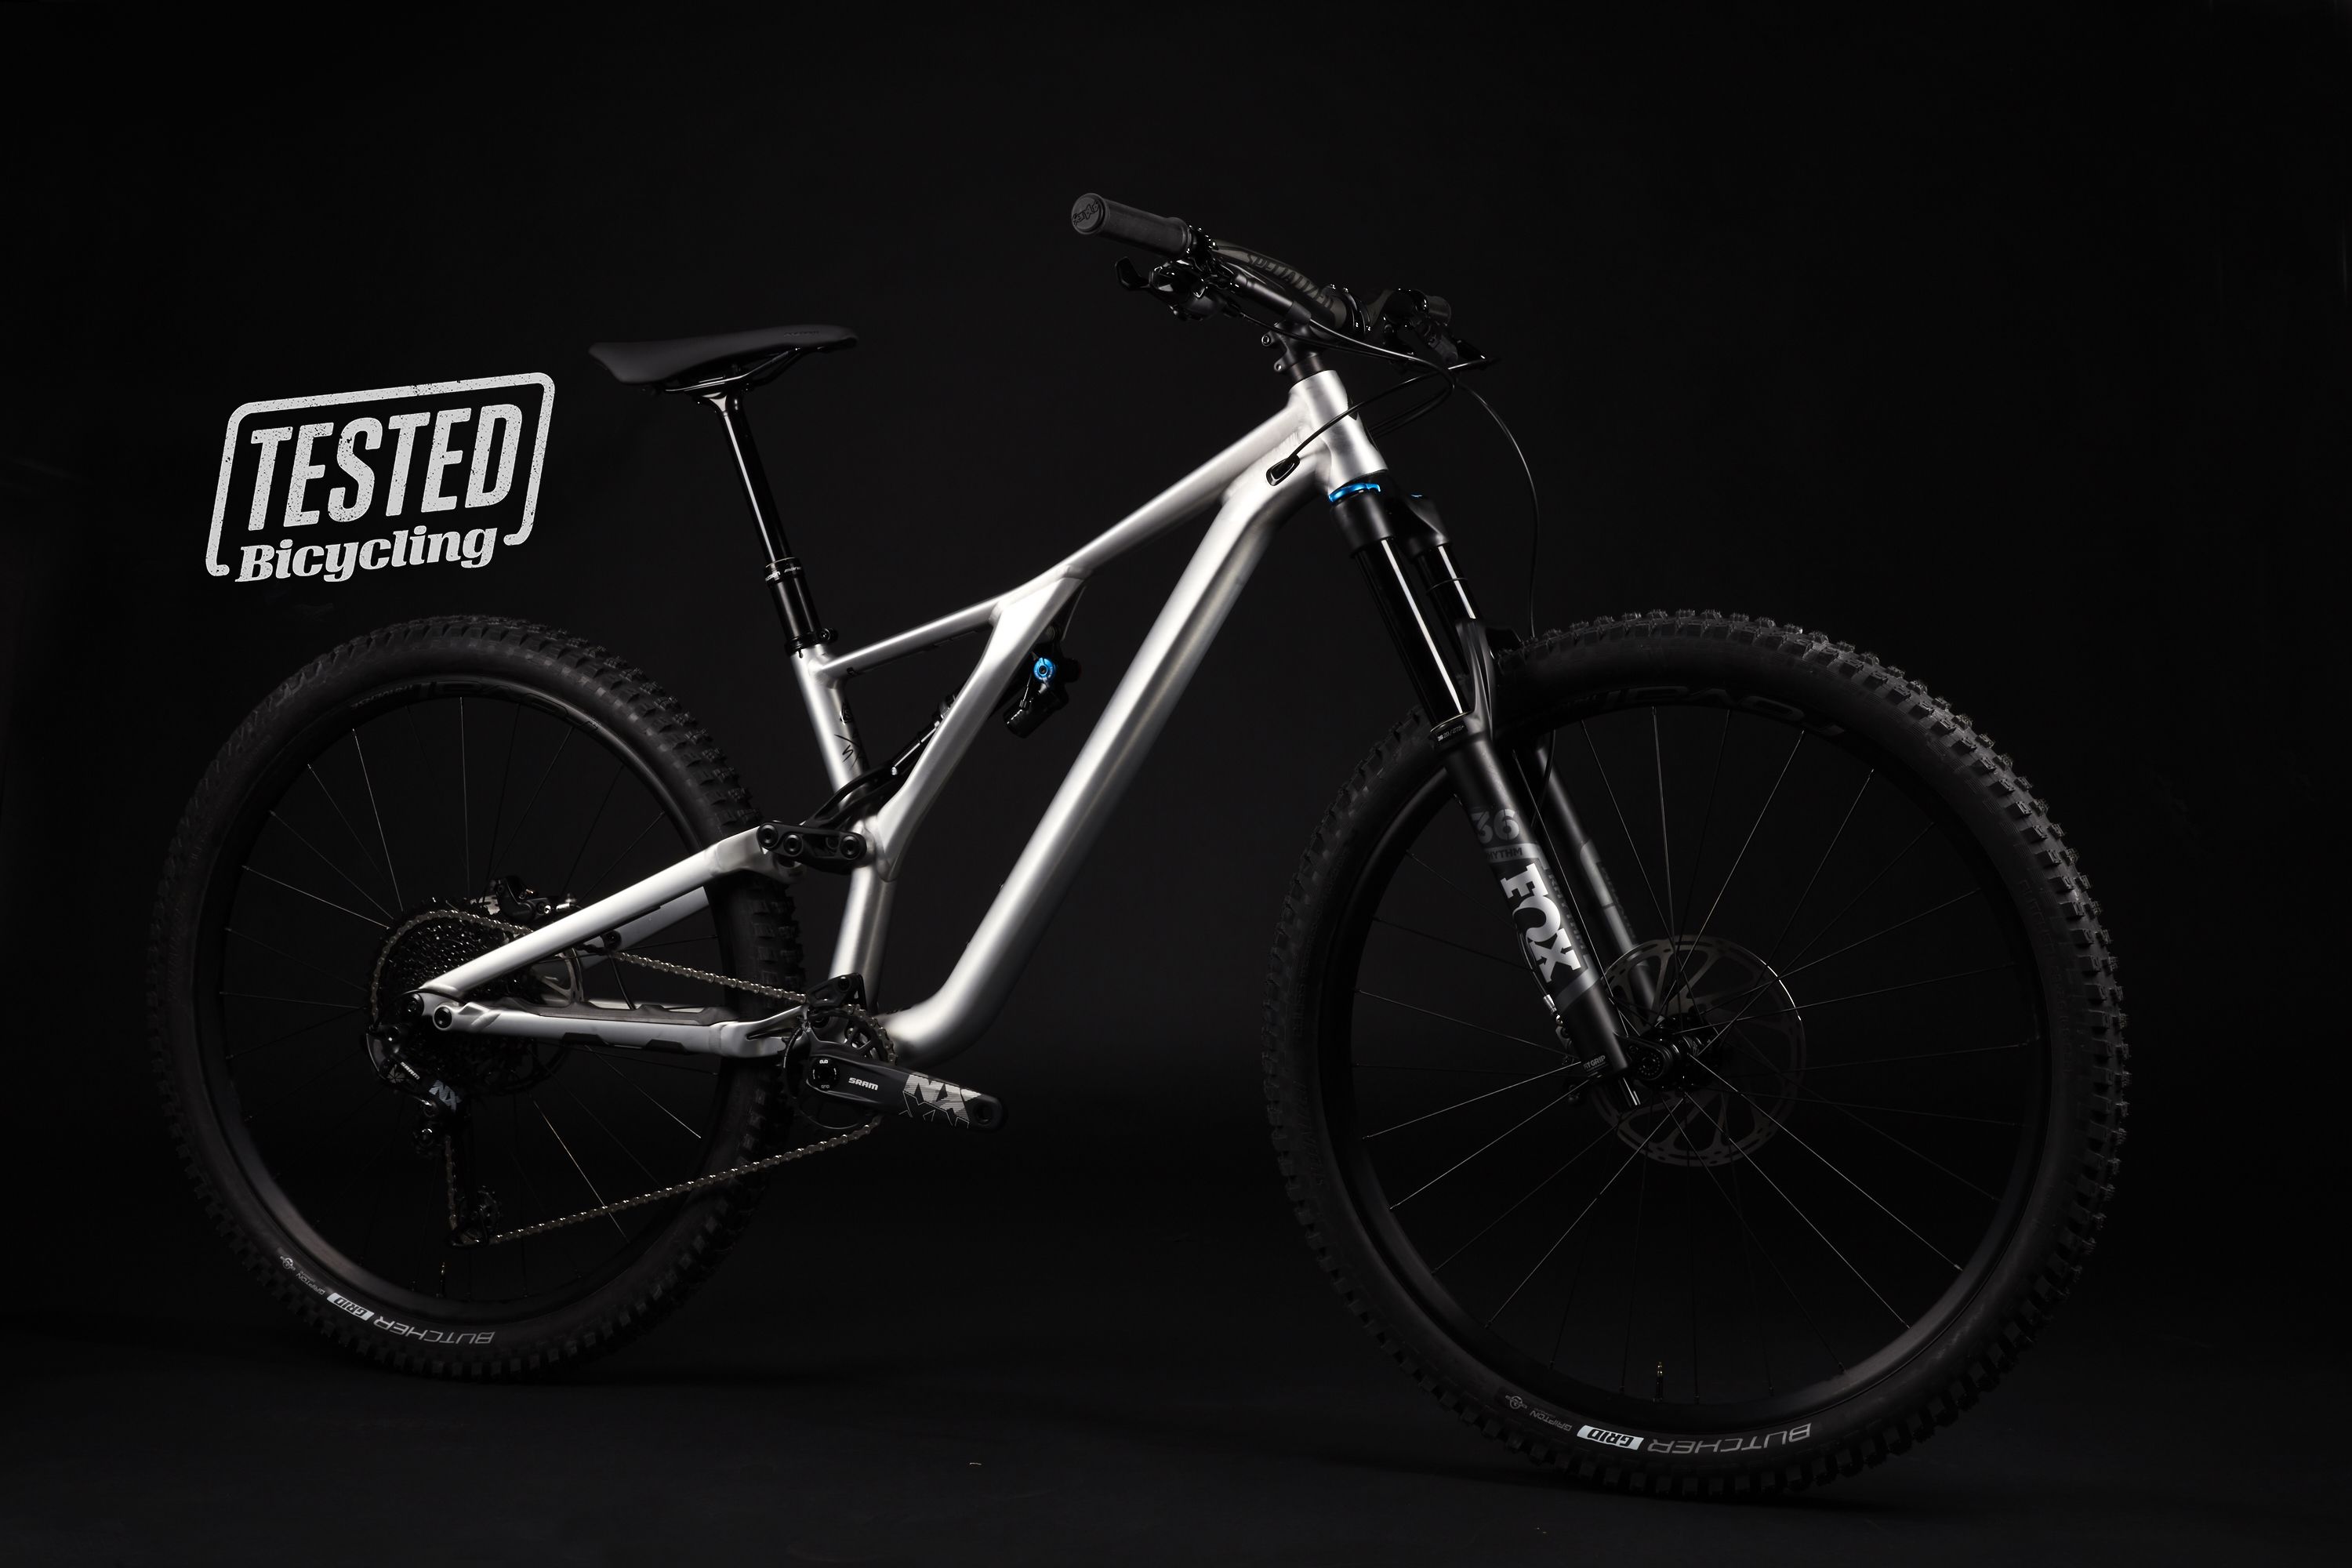 specialized stumpjumper bicycles